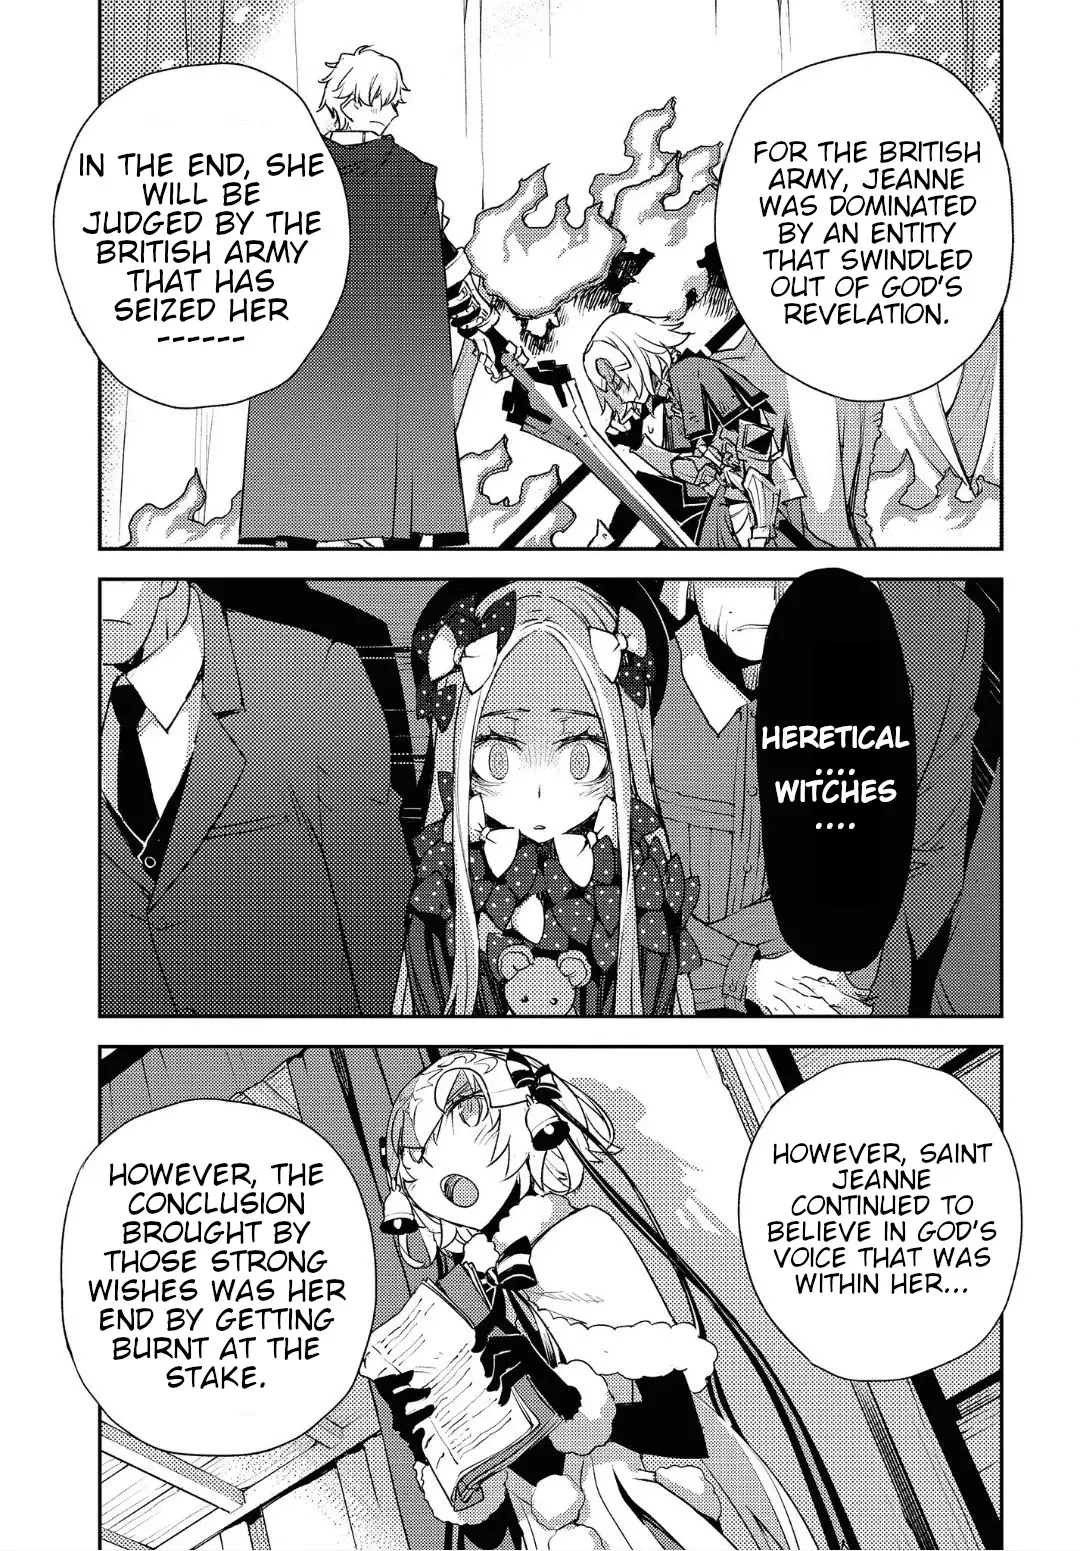 Fate/grand Order: Epic Of Remnant - Subspecies Singularity Iv: Taboo Advent Salem: Salem Of Heresy - 14 page 16